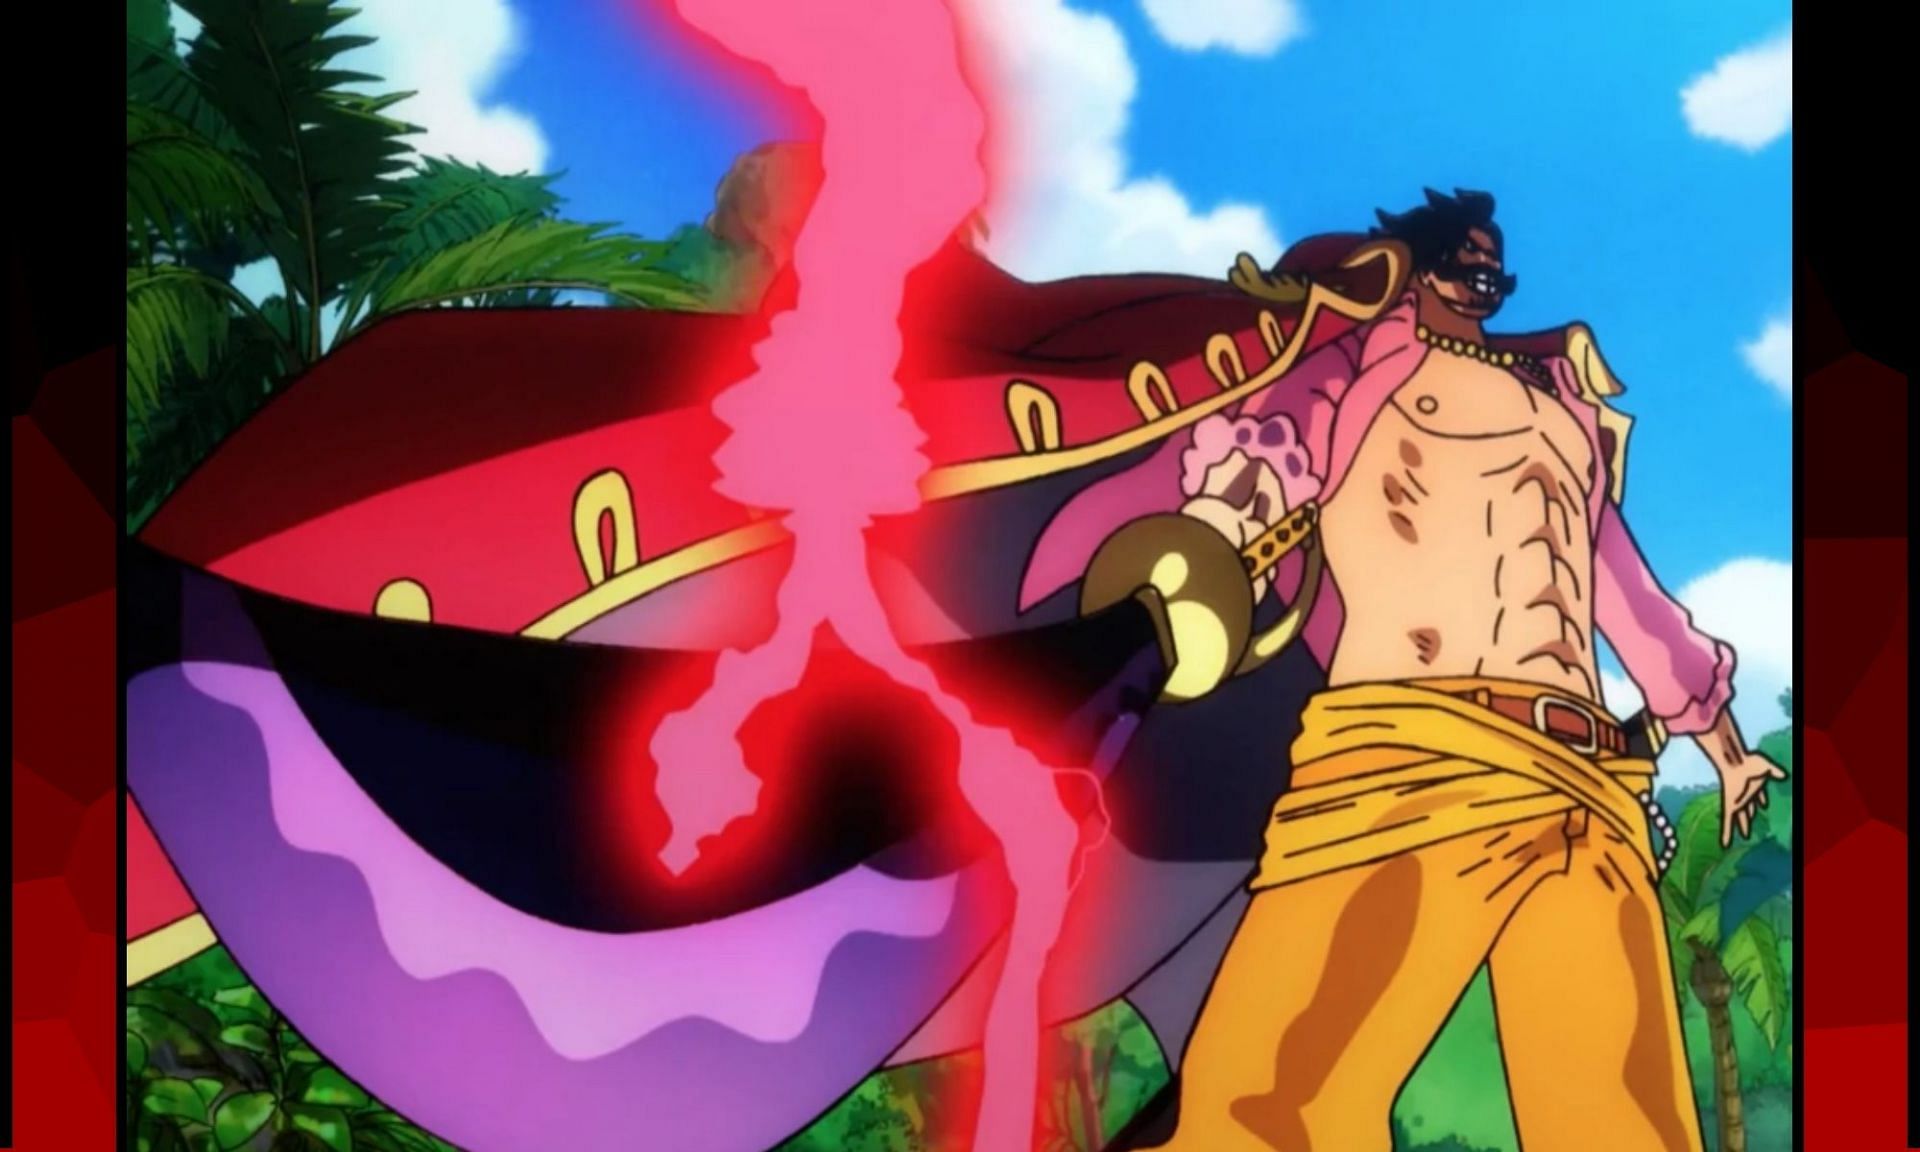 The Pirate King is one of the strongest men who ever lived in One Piece (Image via Toei Animation)